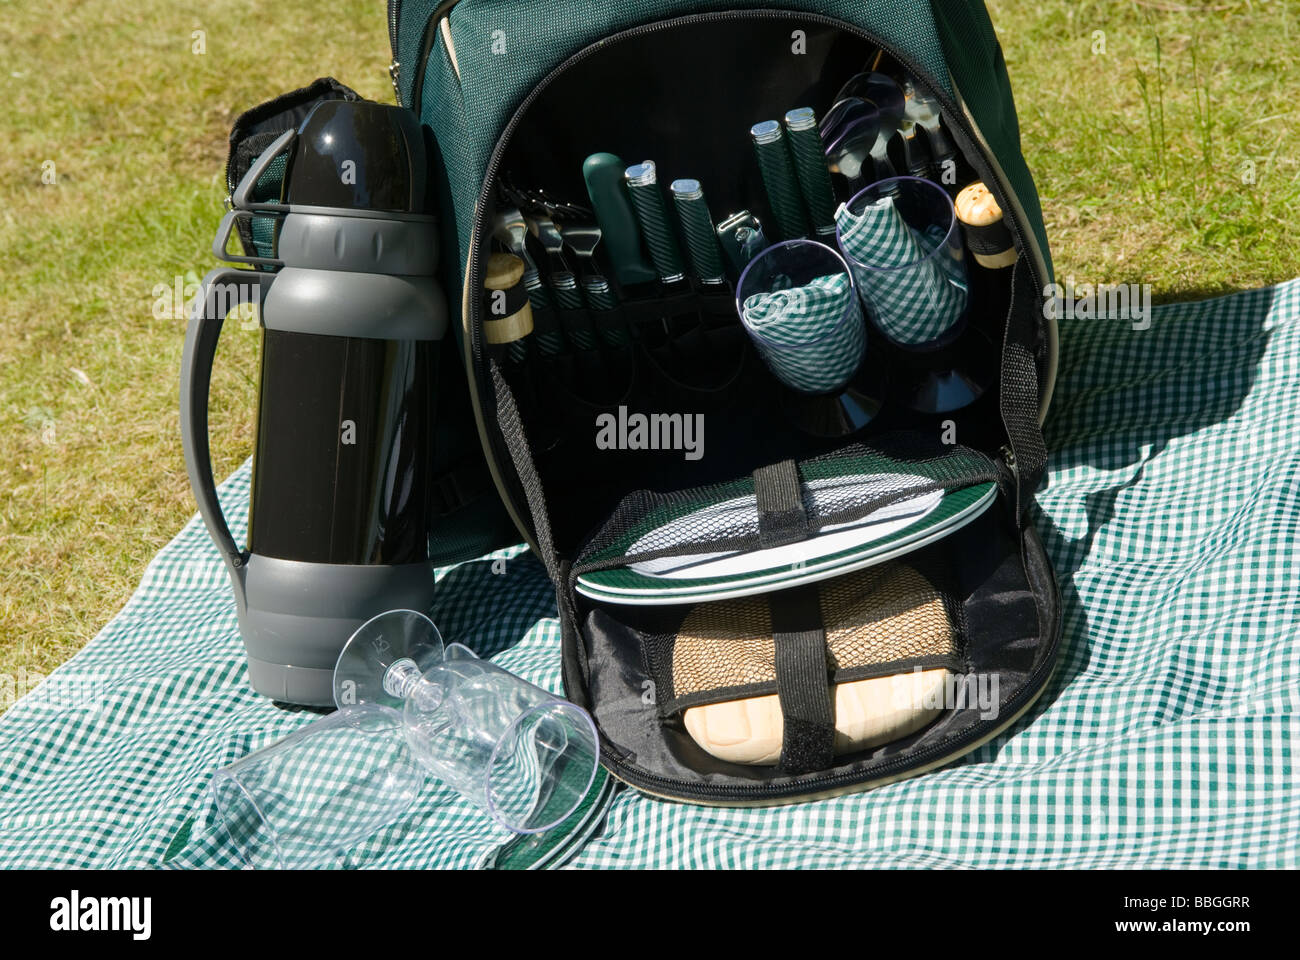 A picnic backpack hamper set outside on a checked green tablecoth England Stock Photo